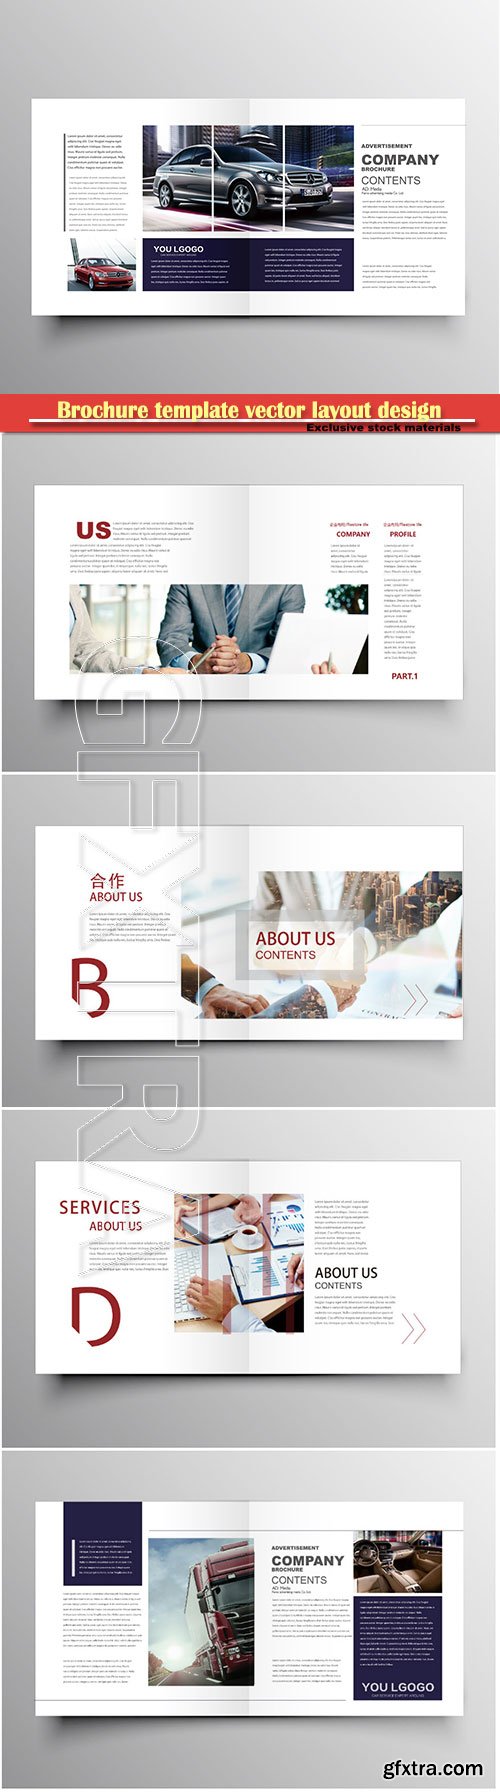 Brochure template vector layout design, corporate business annual report, magazine, flyer mockup # 180